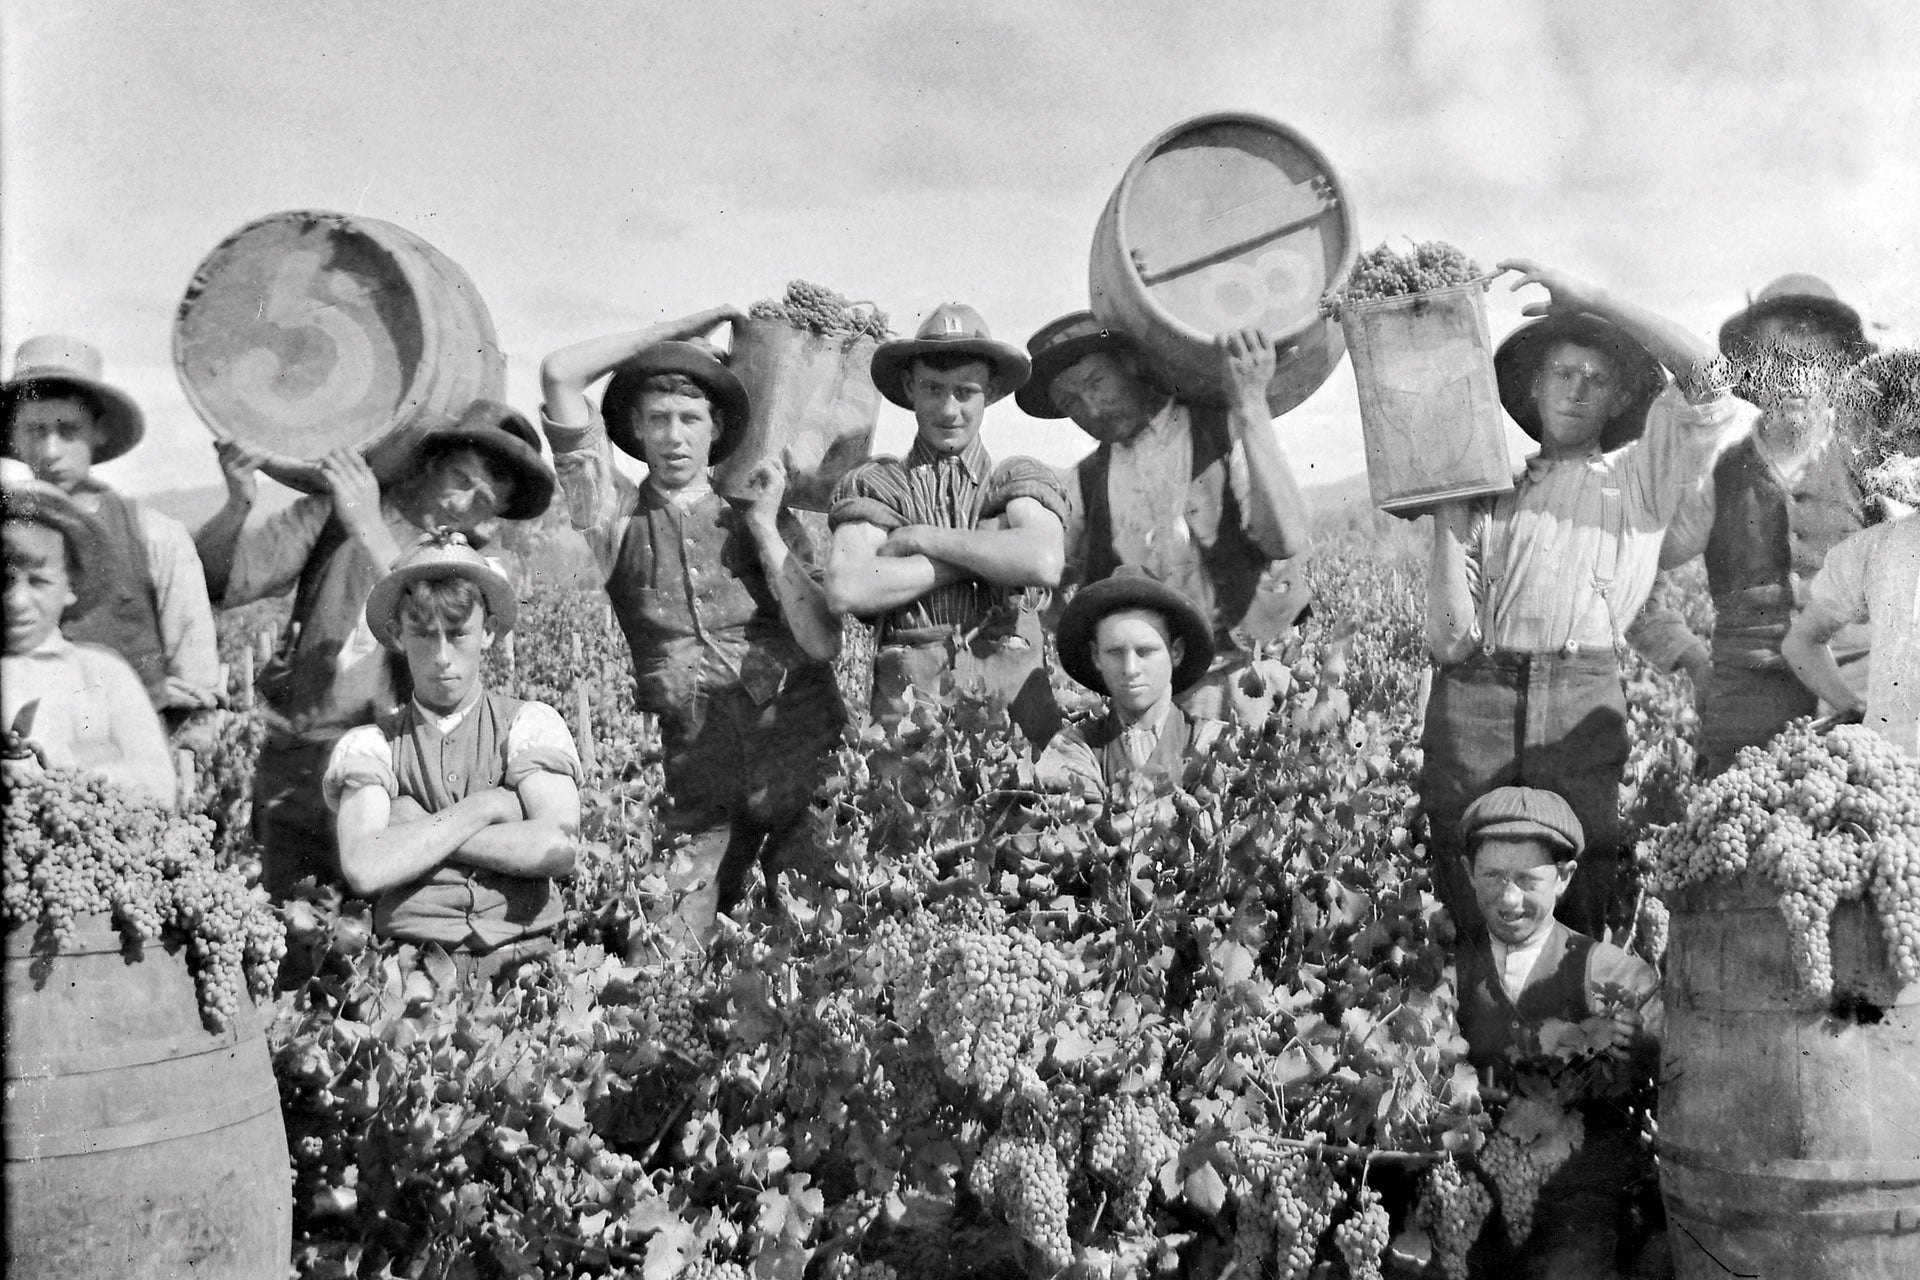 An old photo of workers in the Concongella vineyard circa 1900.